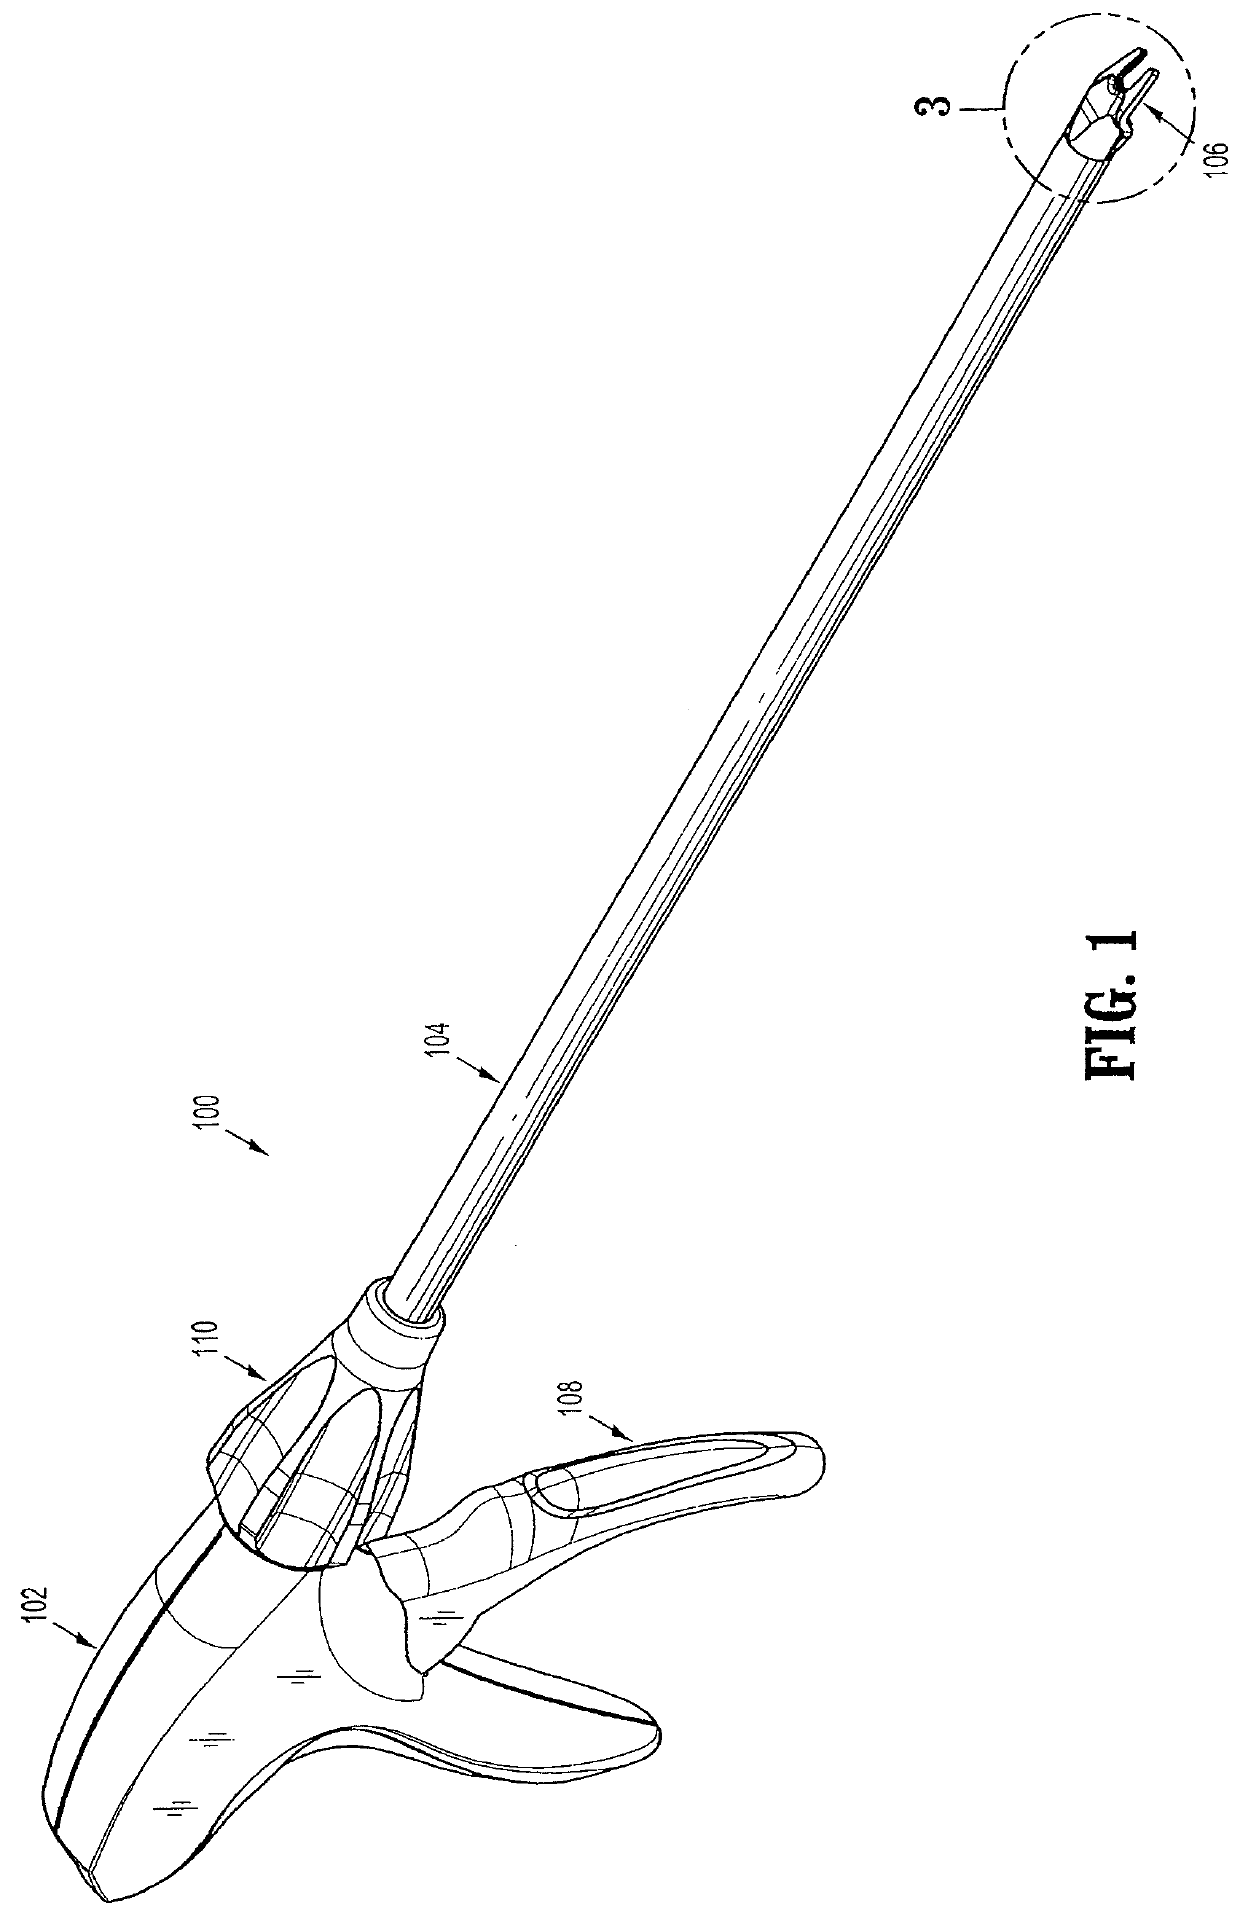 Endoscopic surgical clip applier with wedge plate